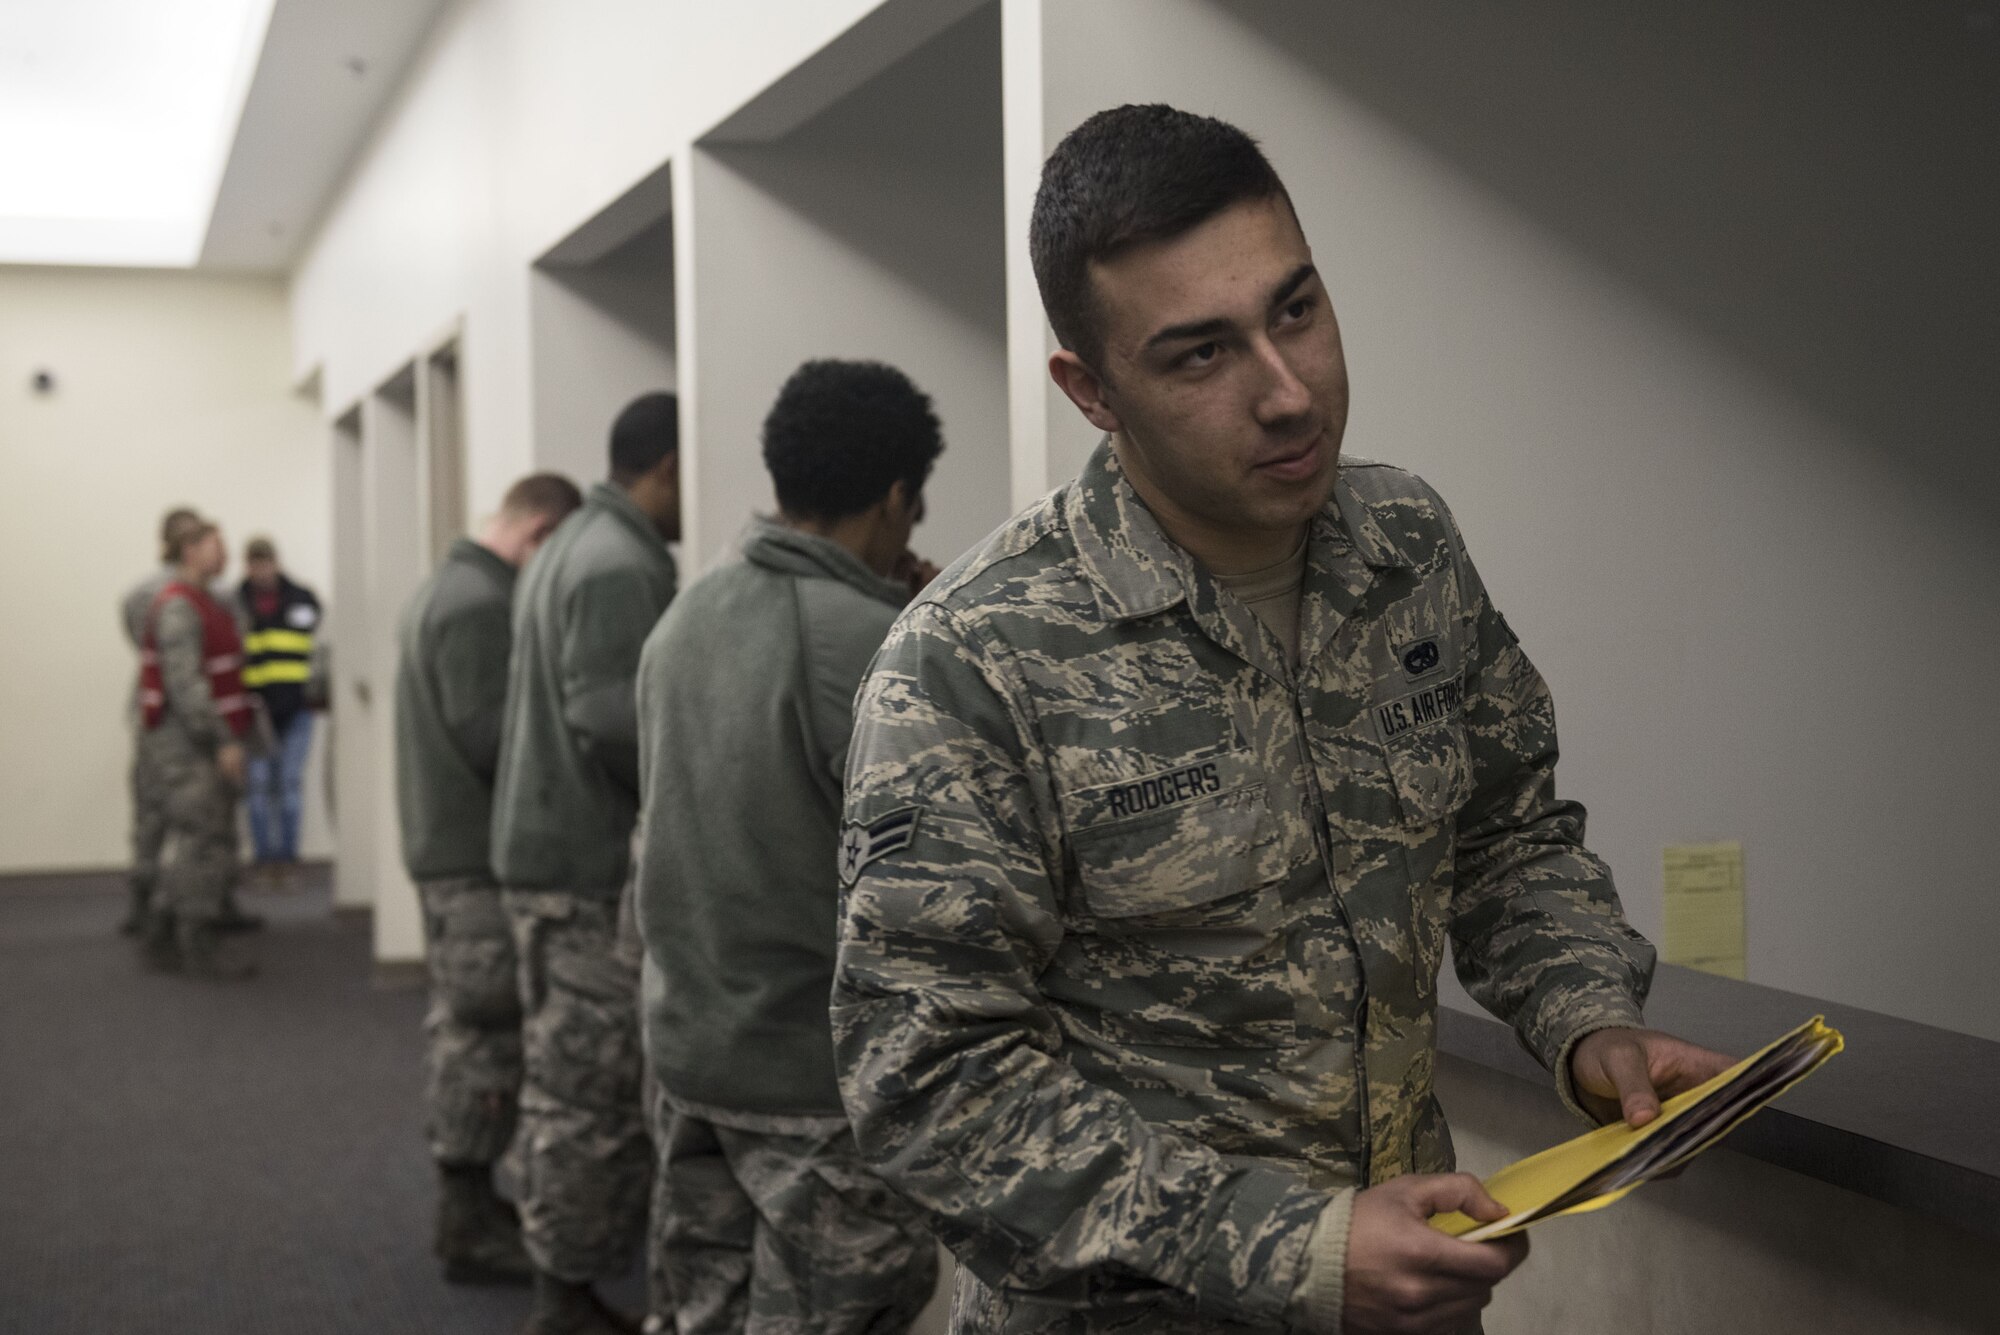 U.S. Airmen process through a pre-deployment line during a Phase I exercise at Shaw Air Force Base, S.C., Feb. 4, 2018.